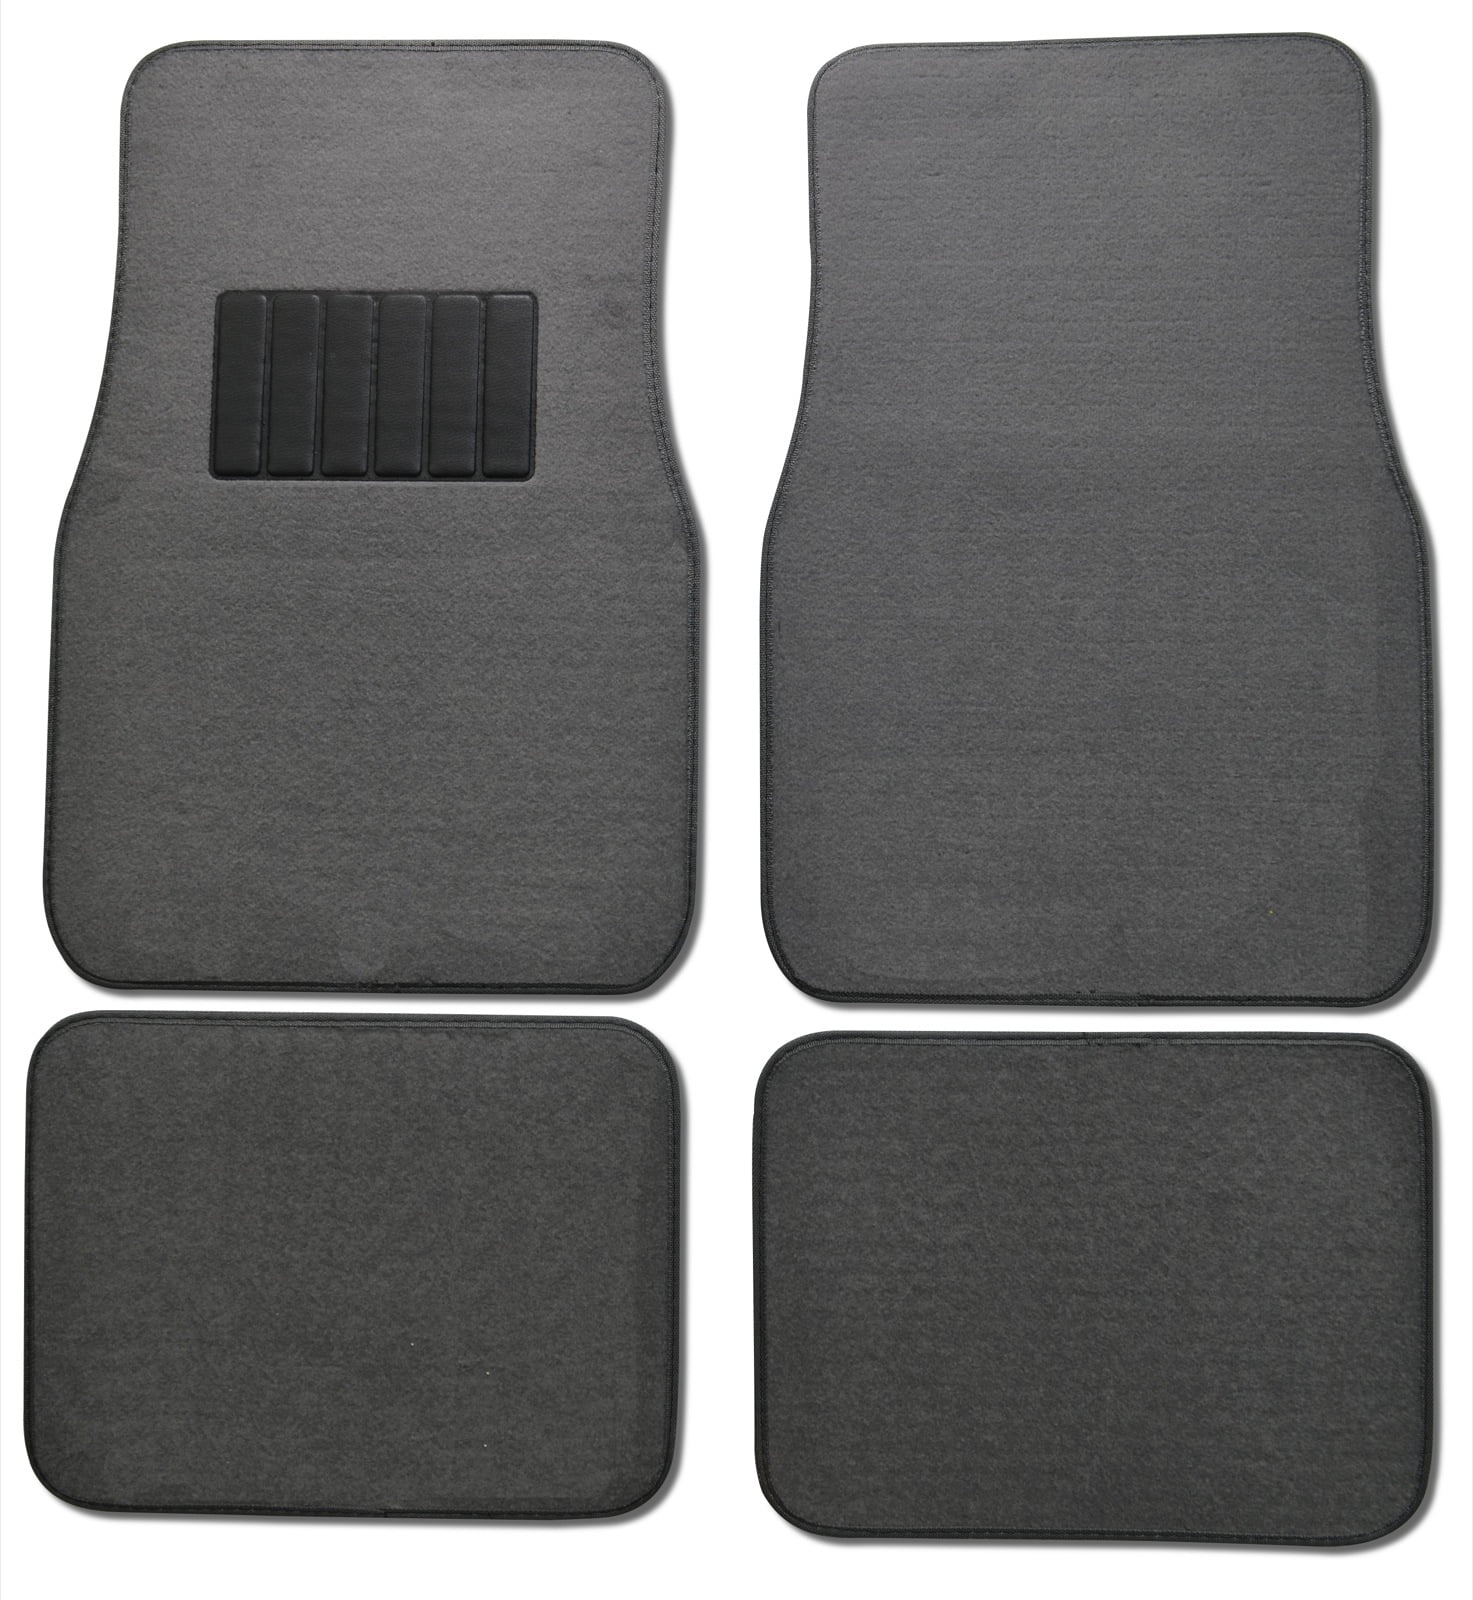 Car Floor Mats for 4 Piece Personalized Universal Auto Interior